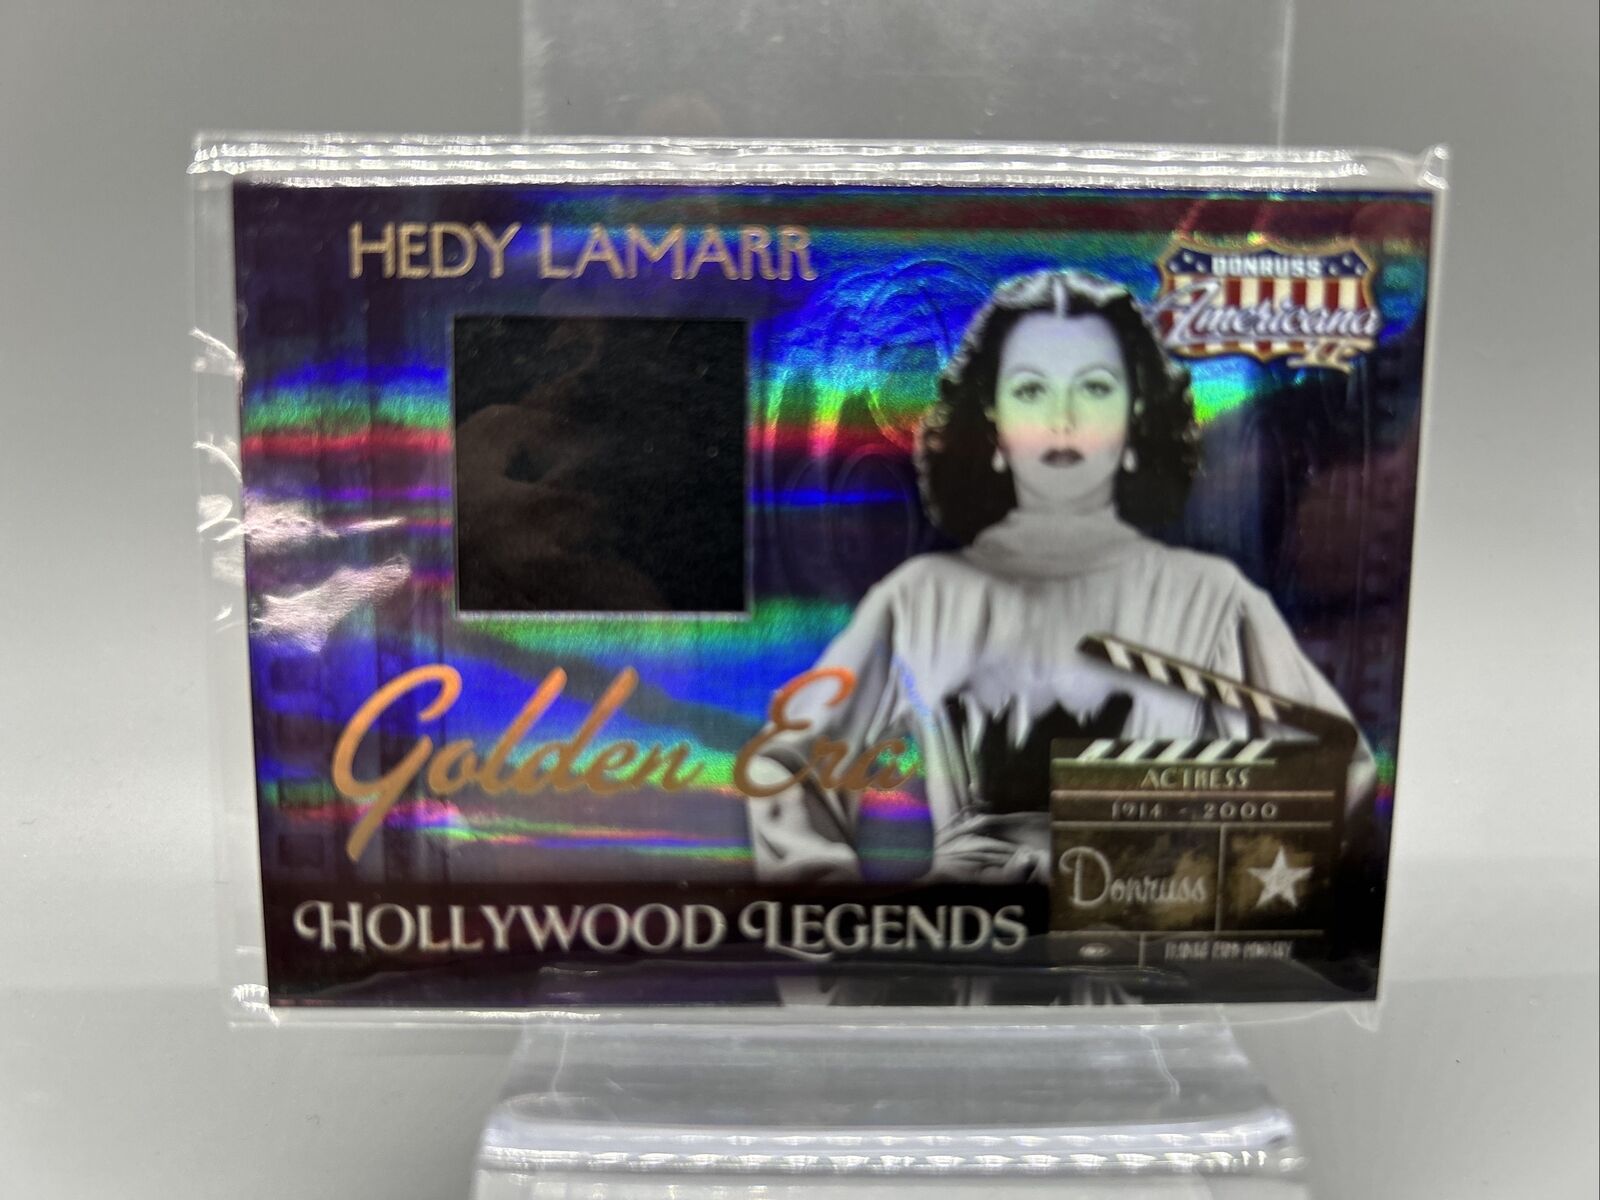 2008 Donruss Americana Hollywood Legends Hedy Lamarr Patch/Relic Card 22/50